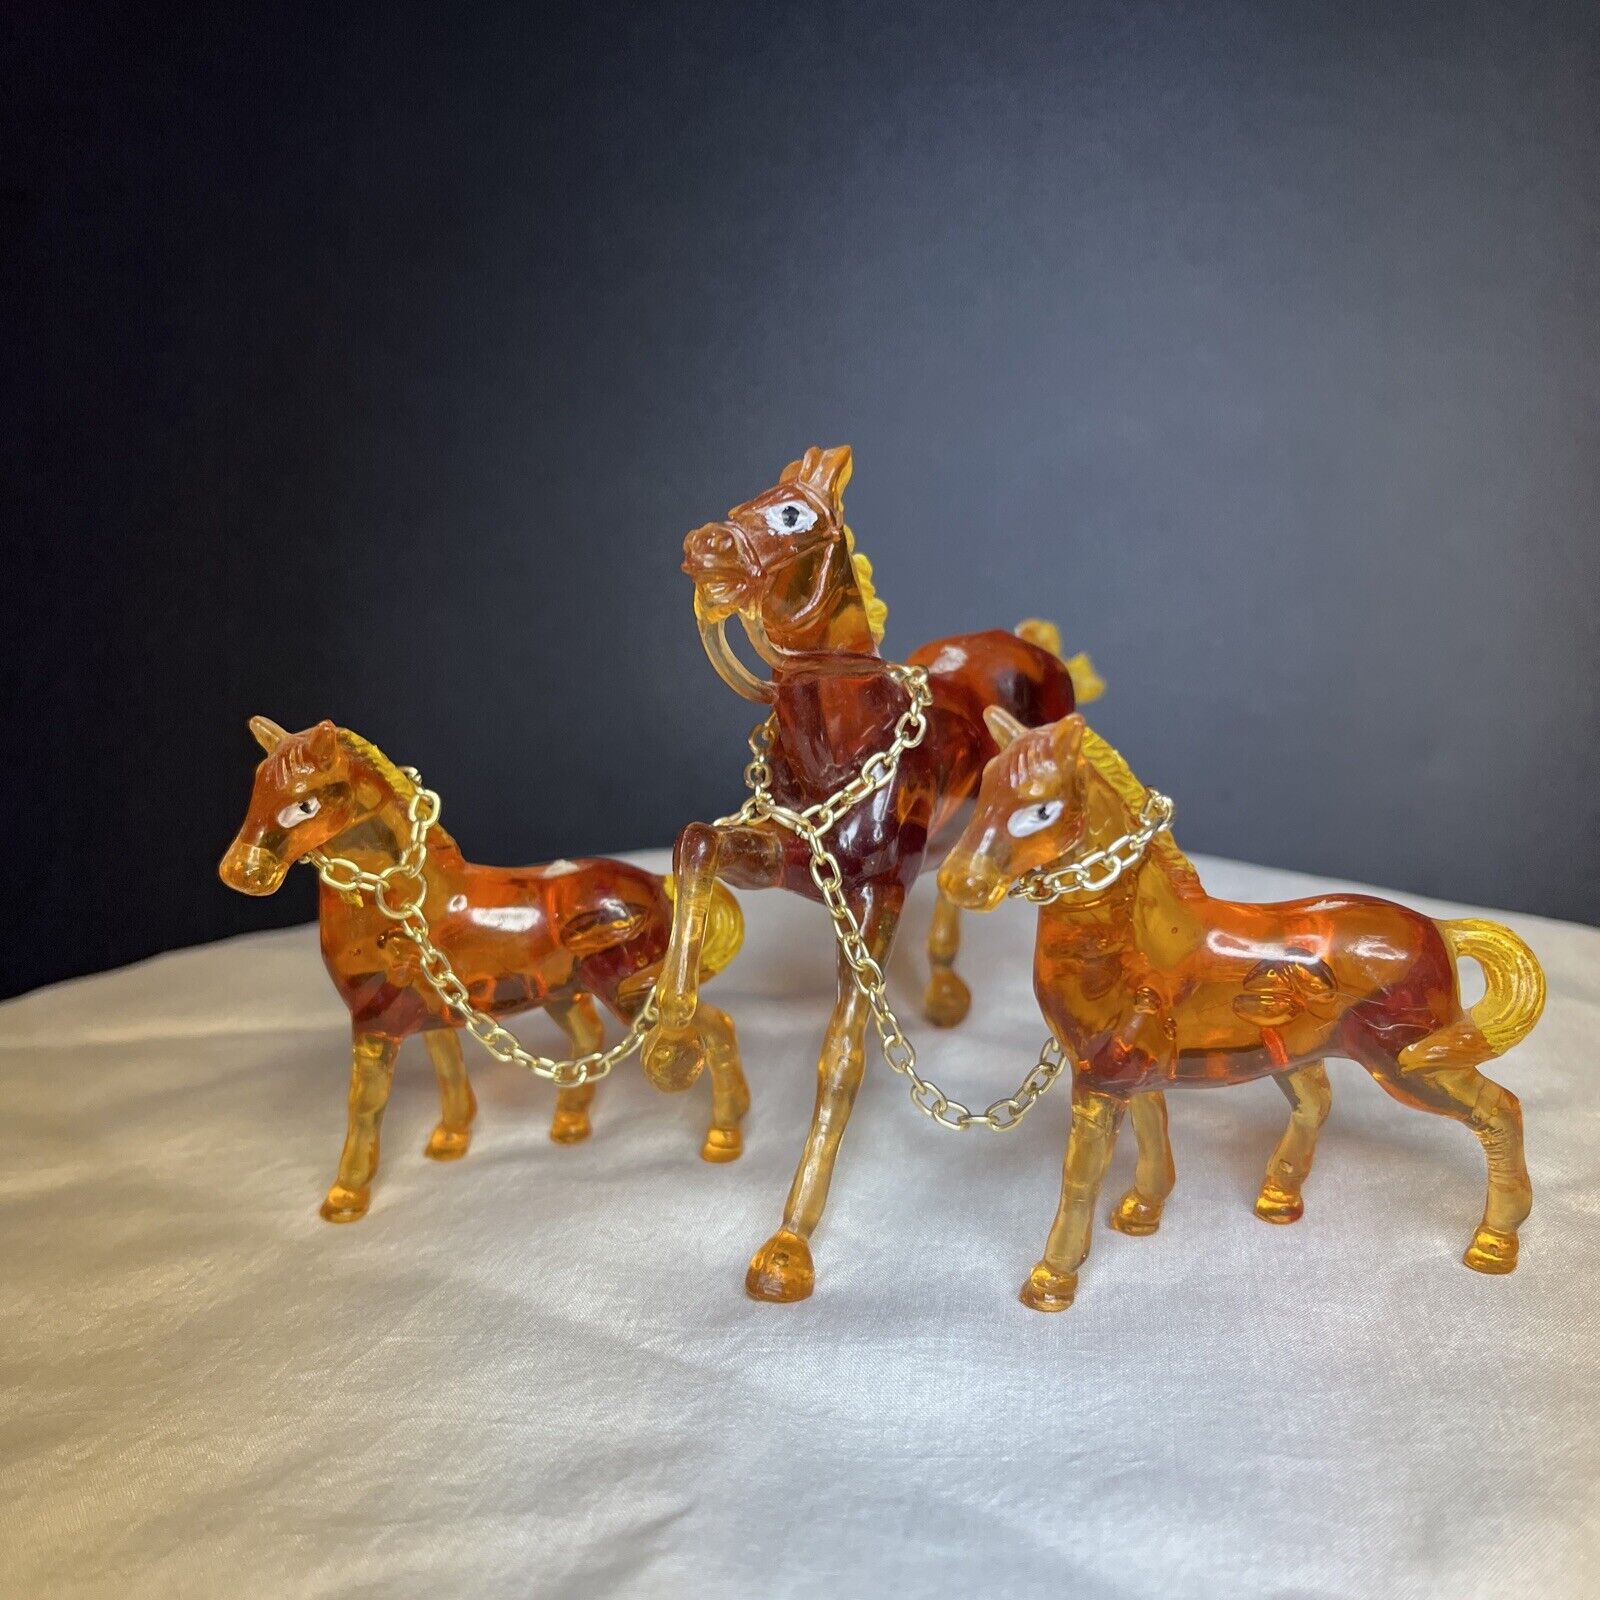 70s Vibe Amber Color Horses Plastic Horse 2 Foals On Chain Collector Figurine